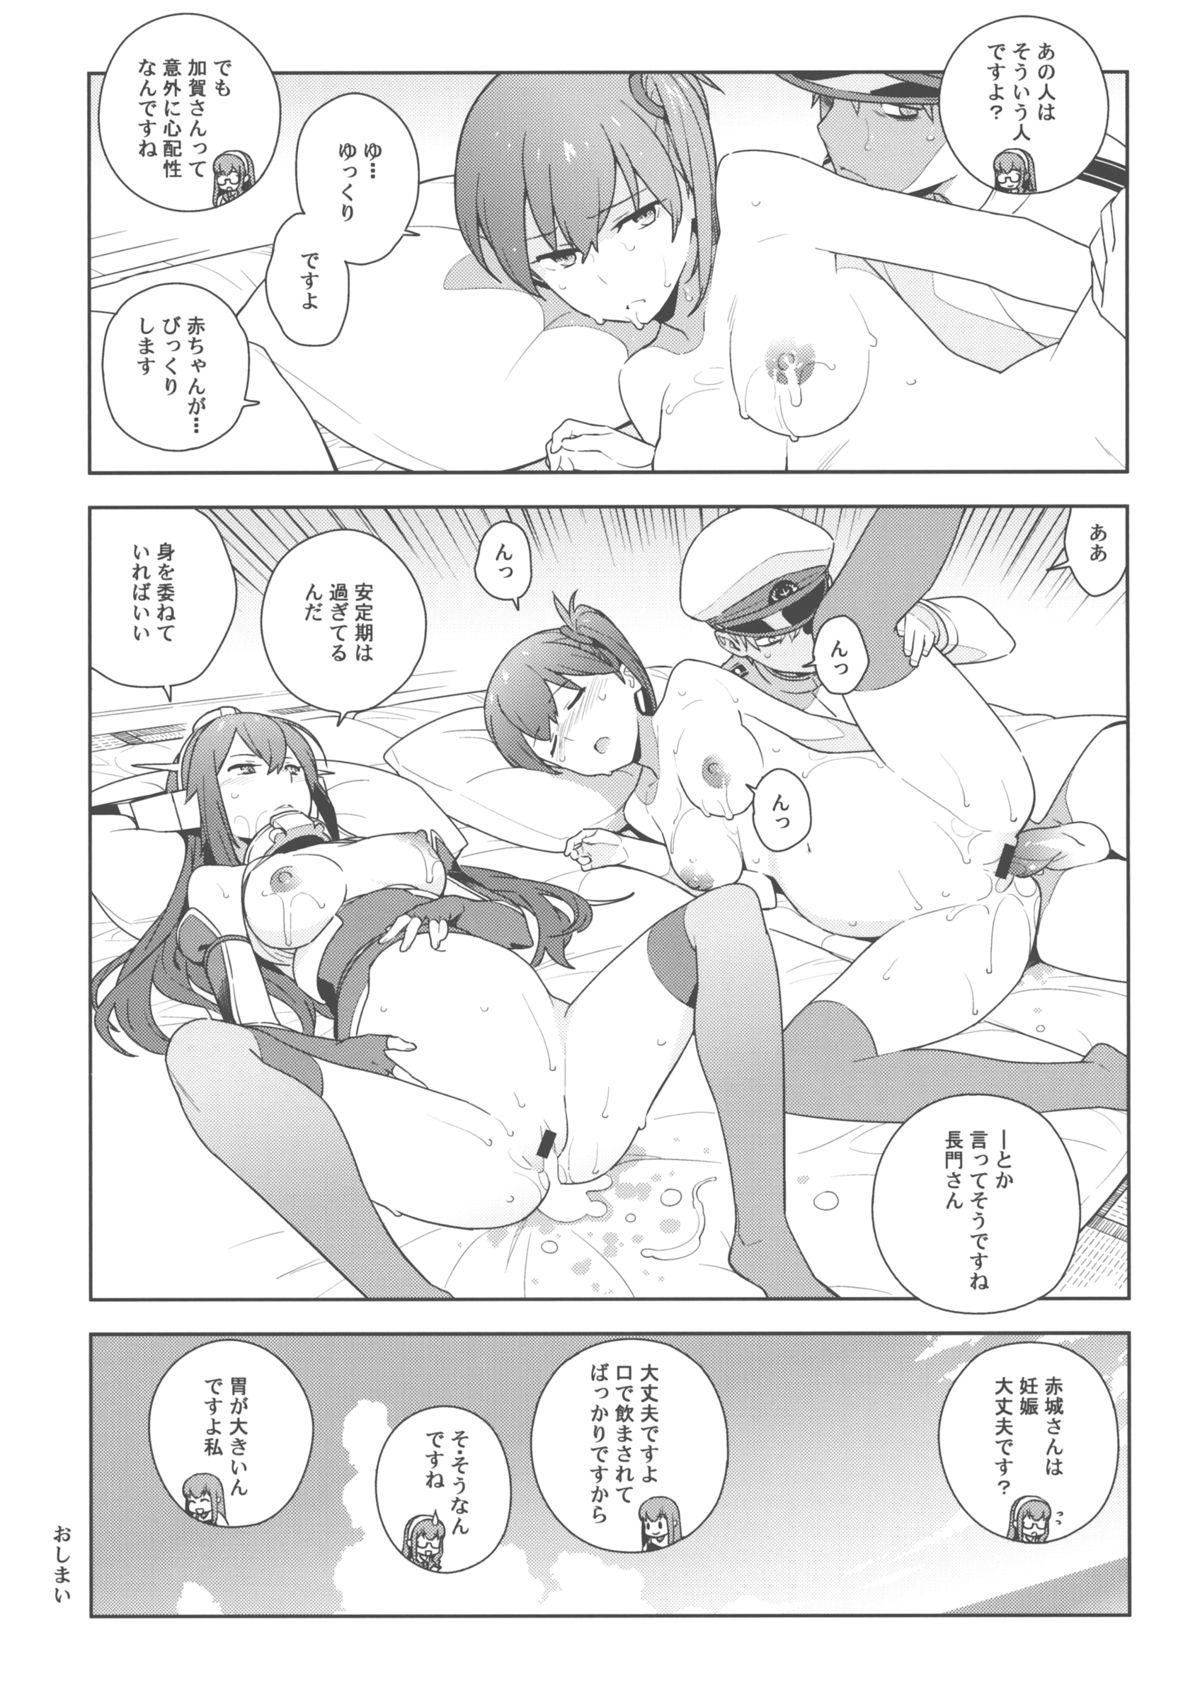 Gayhardcore eggs - Kantai collection Romantic - Page 40